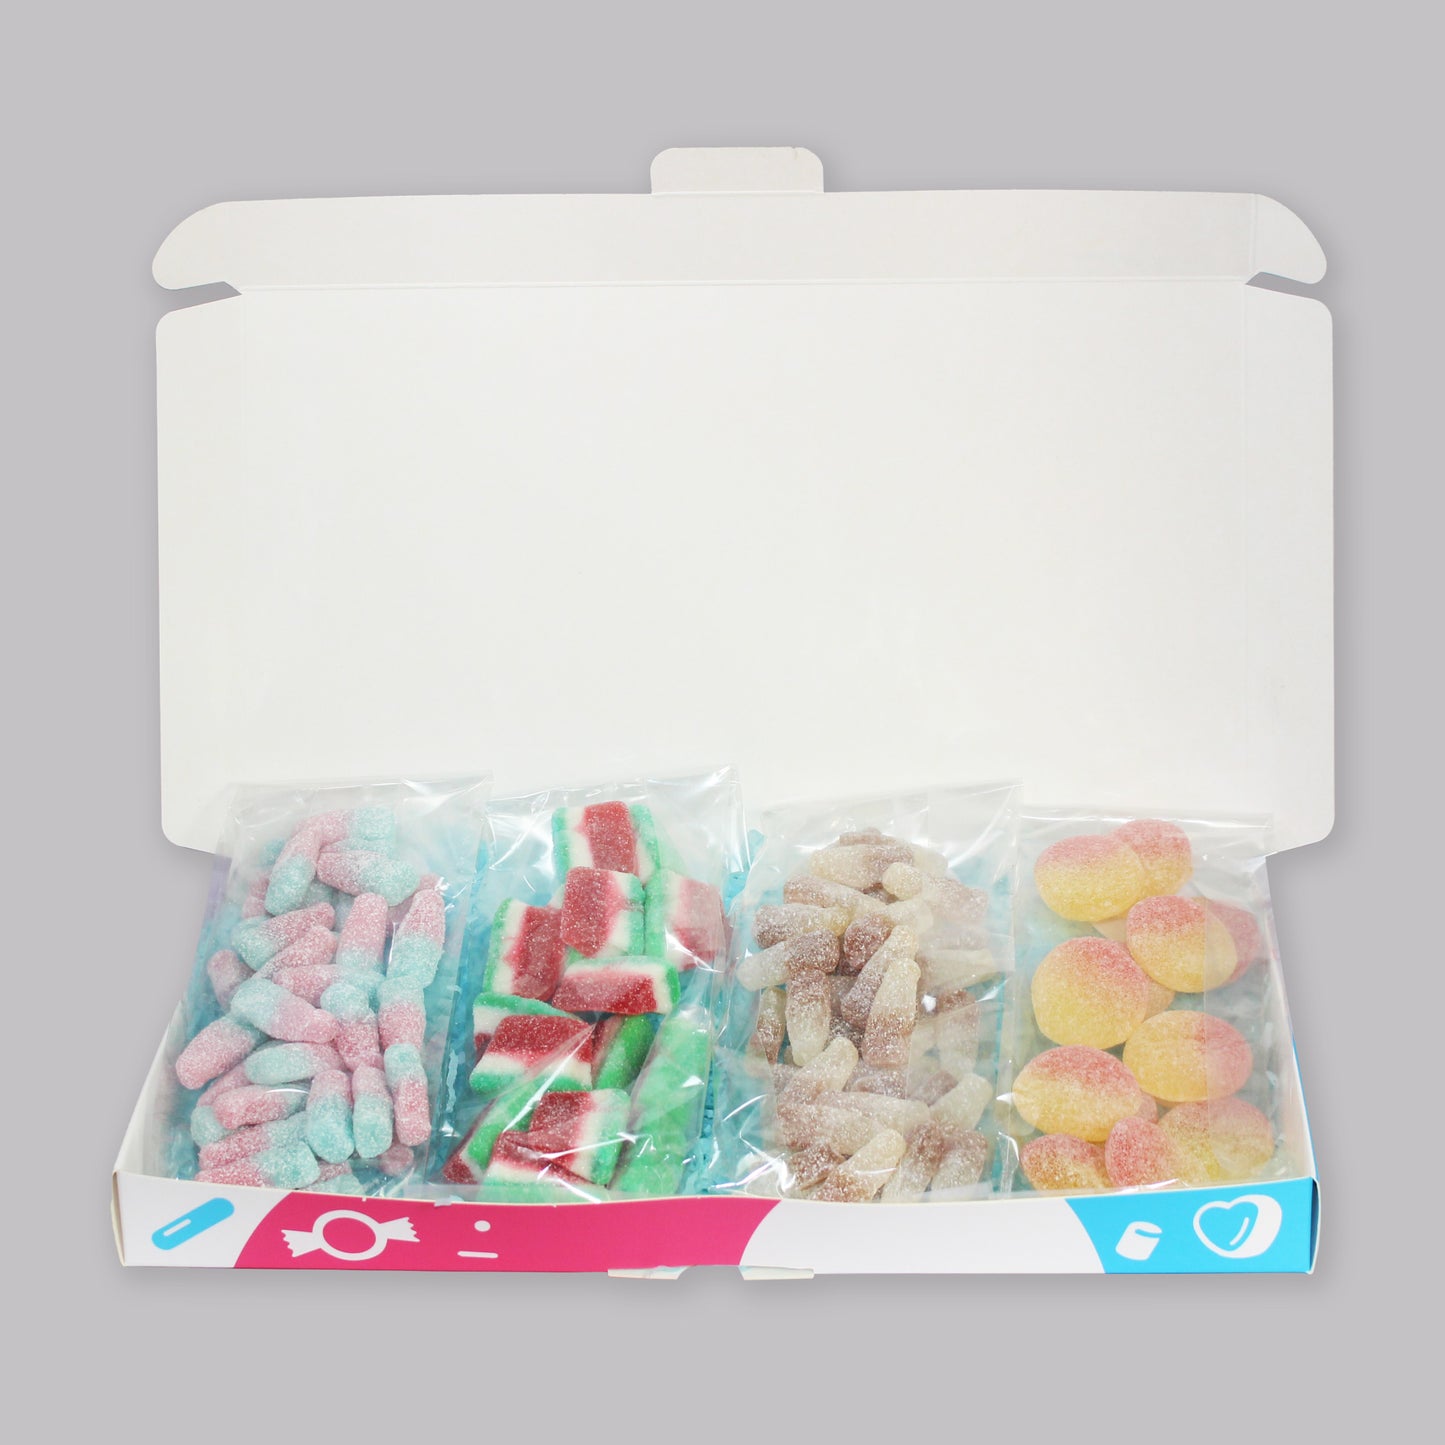 Gift Sweets- Pick and Mix Fizzy Sweets Selection- 125g Fizzy Cola Bottles, 125g Fizzy Bubblegum Bottles, 125g Fizzy Peaches, 125g Watermelon Slices